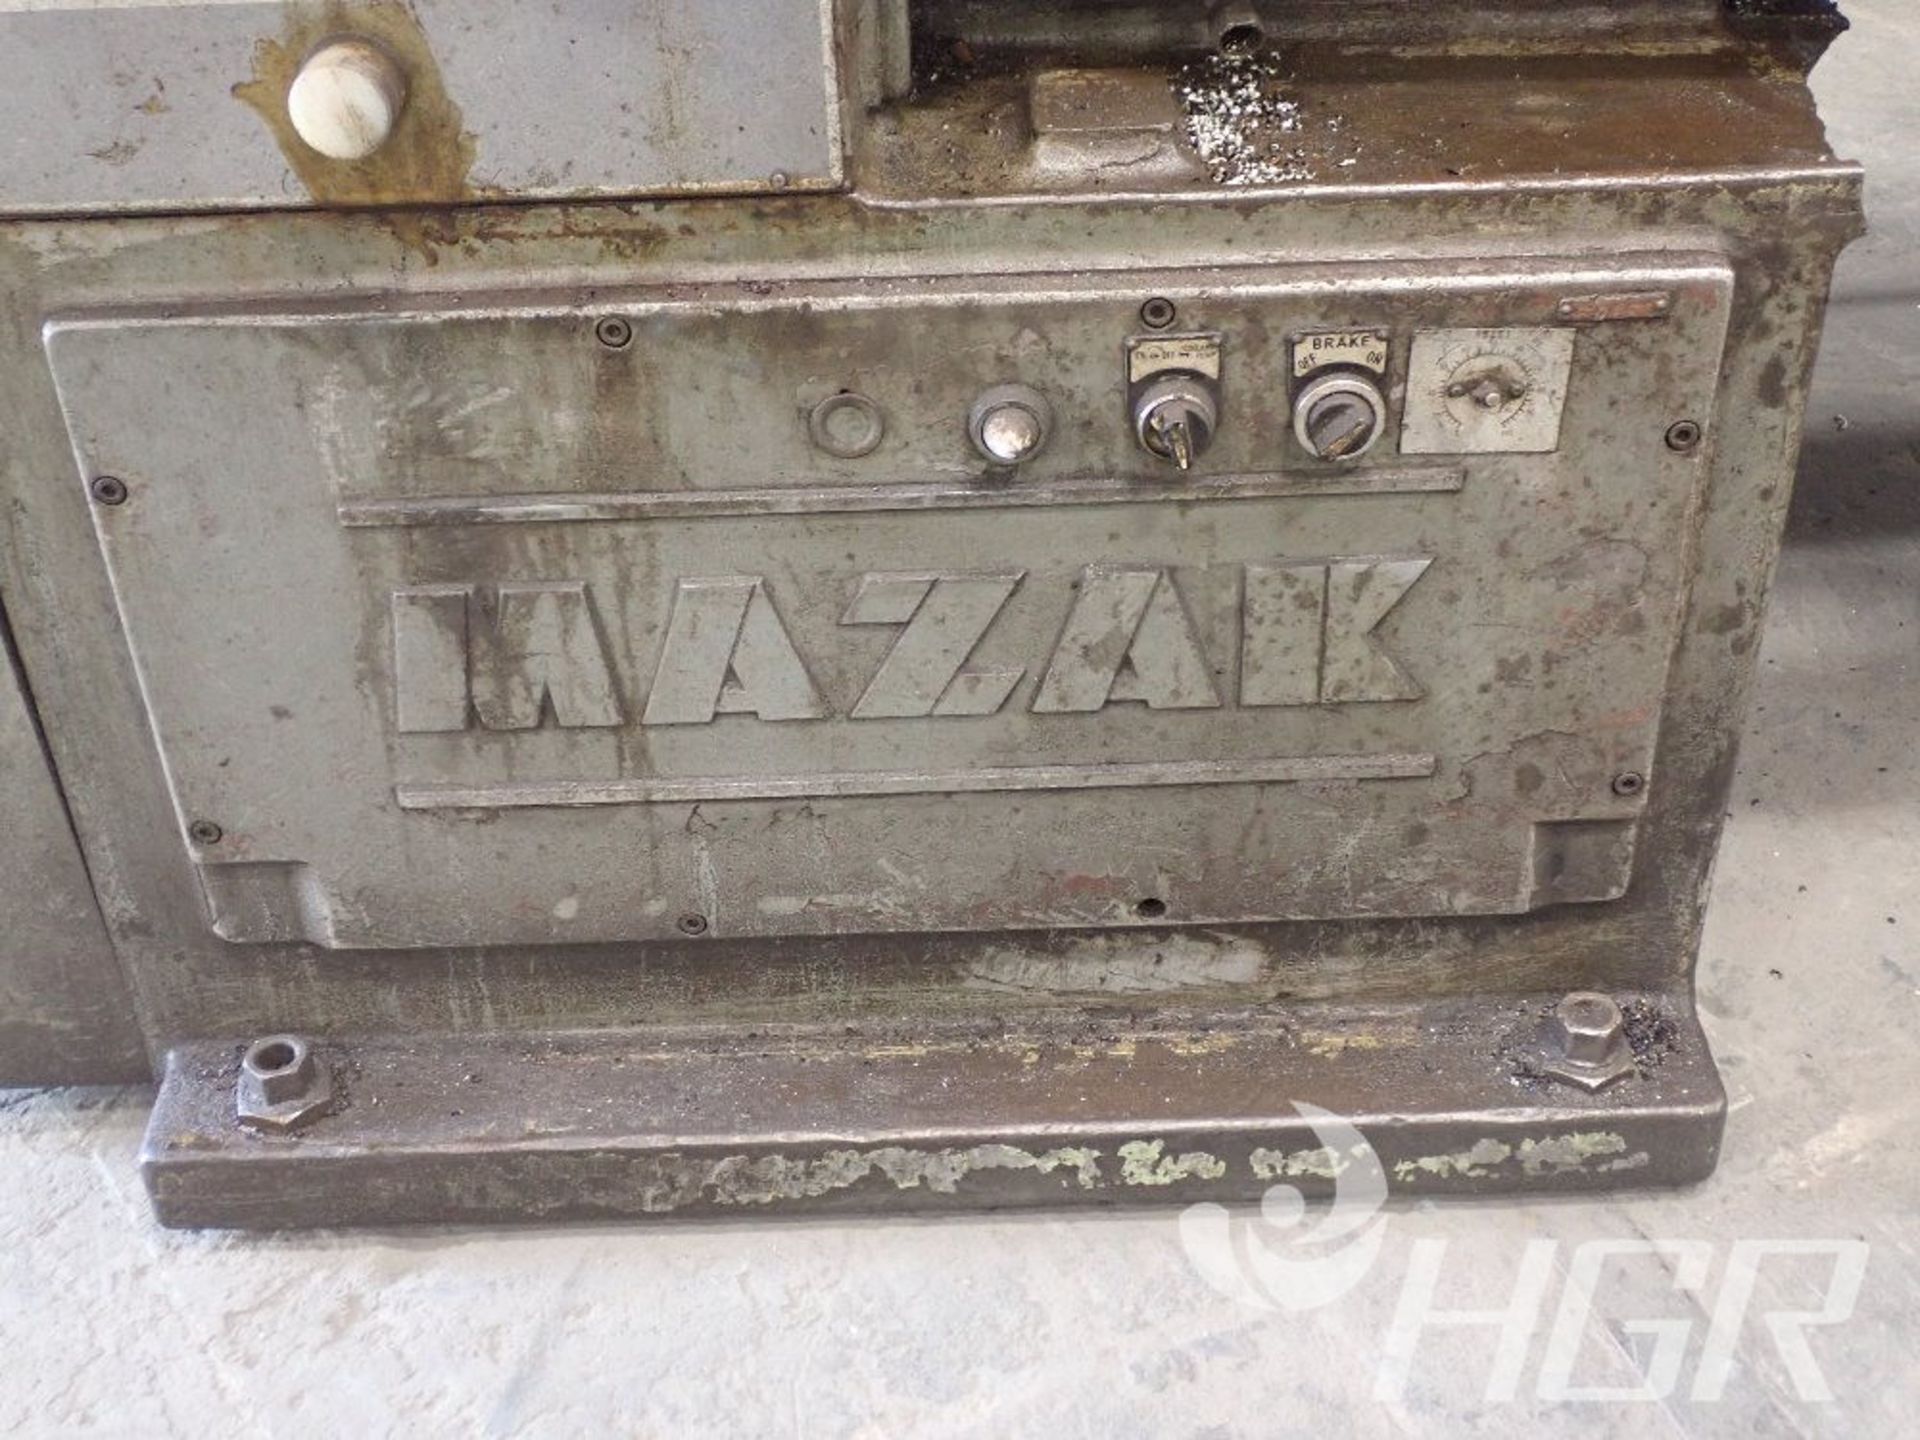 MAZAK GAP BED LATHE, Model n/a, Date: n/a; s/n n/a, Approx. Capacity: 18"X72", Power: n/a, - Image 3 of 17